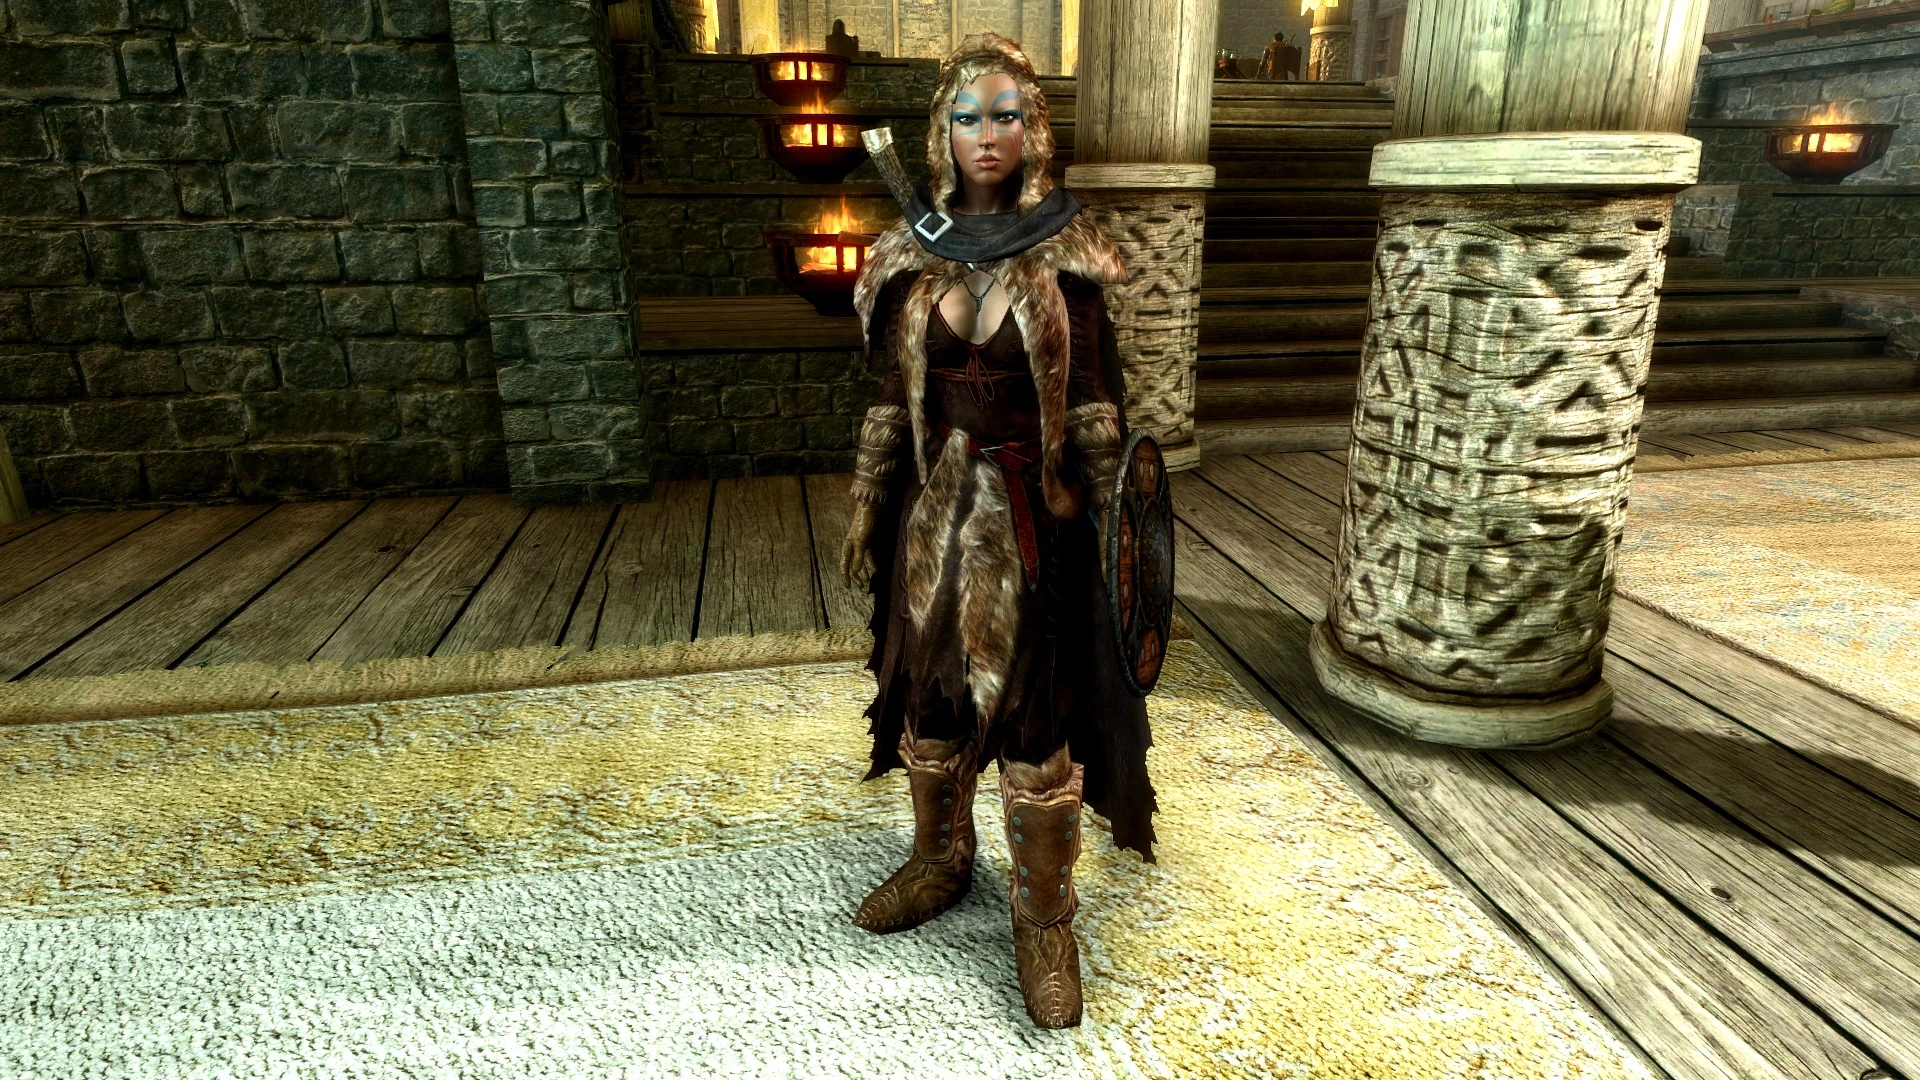 Padded Fur Armor at Skyrim Nexus - Mods and Community. source: staticdelive...